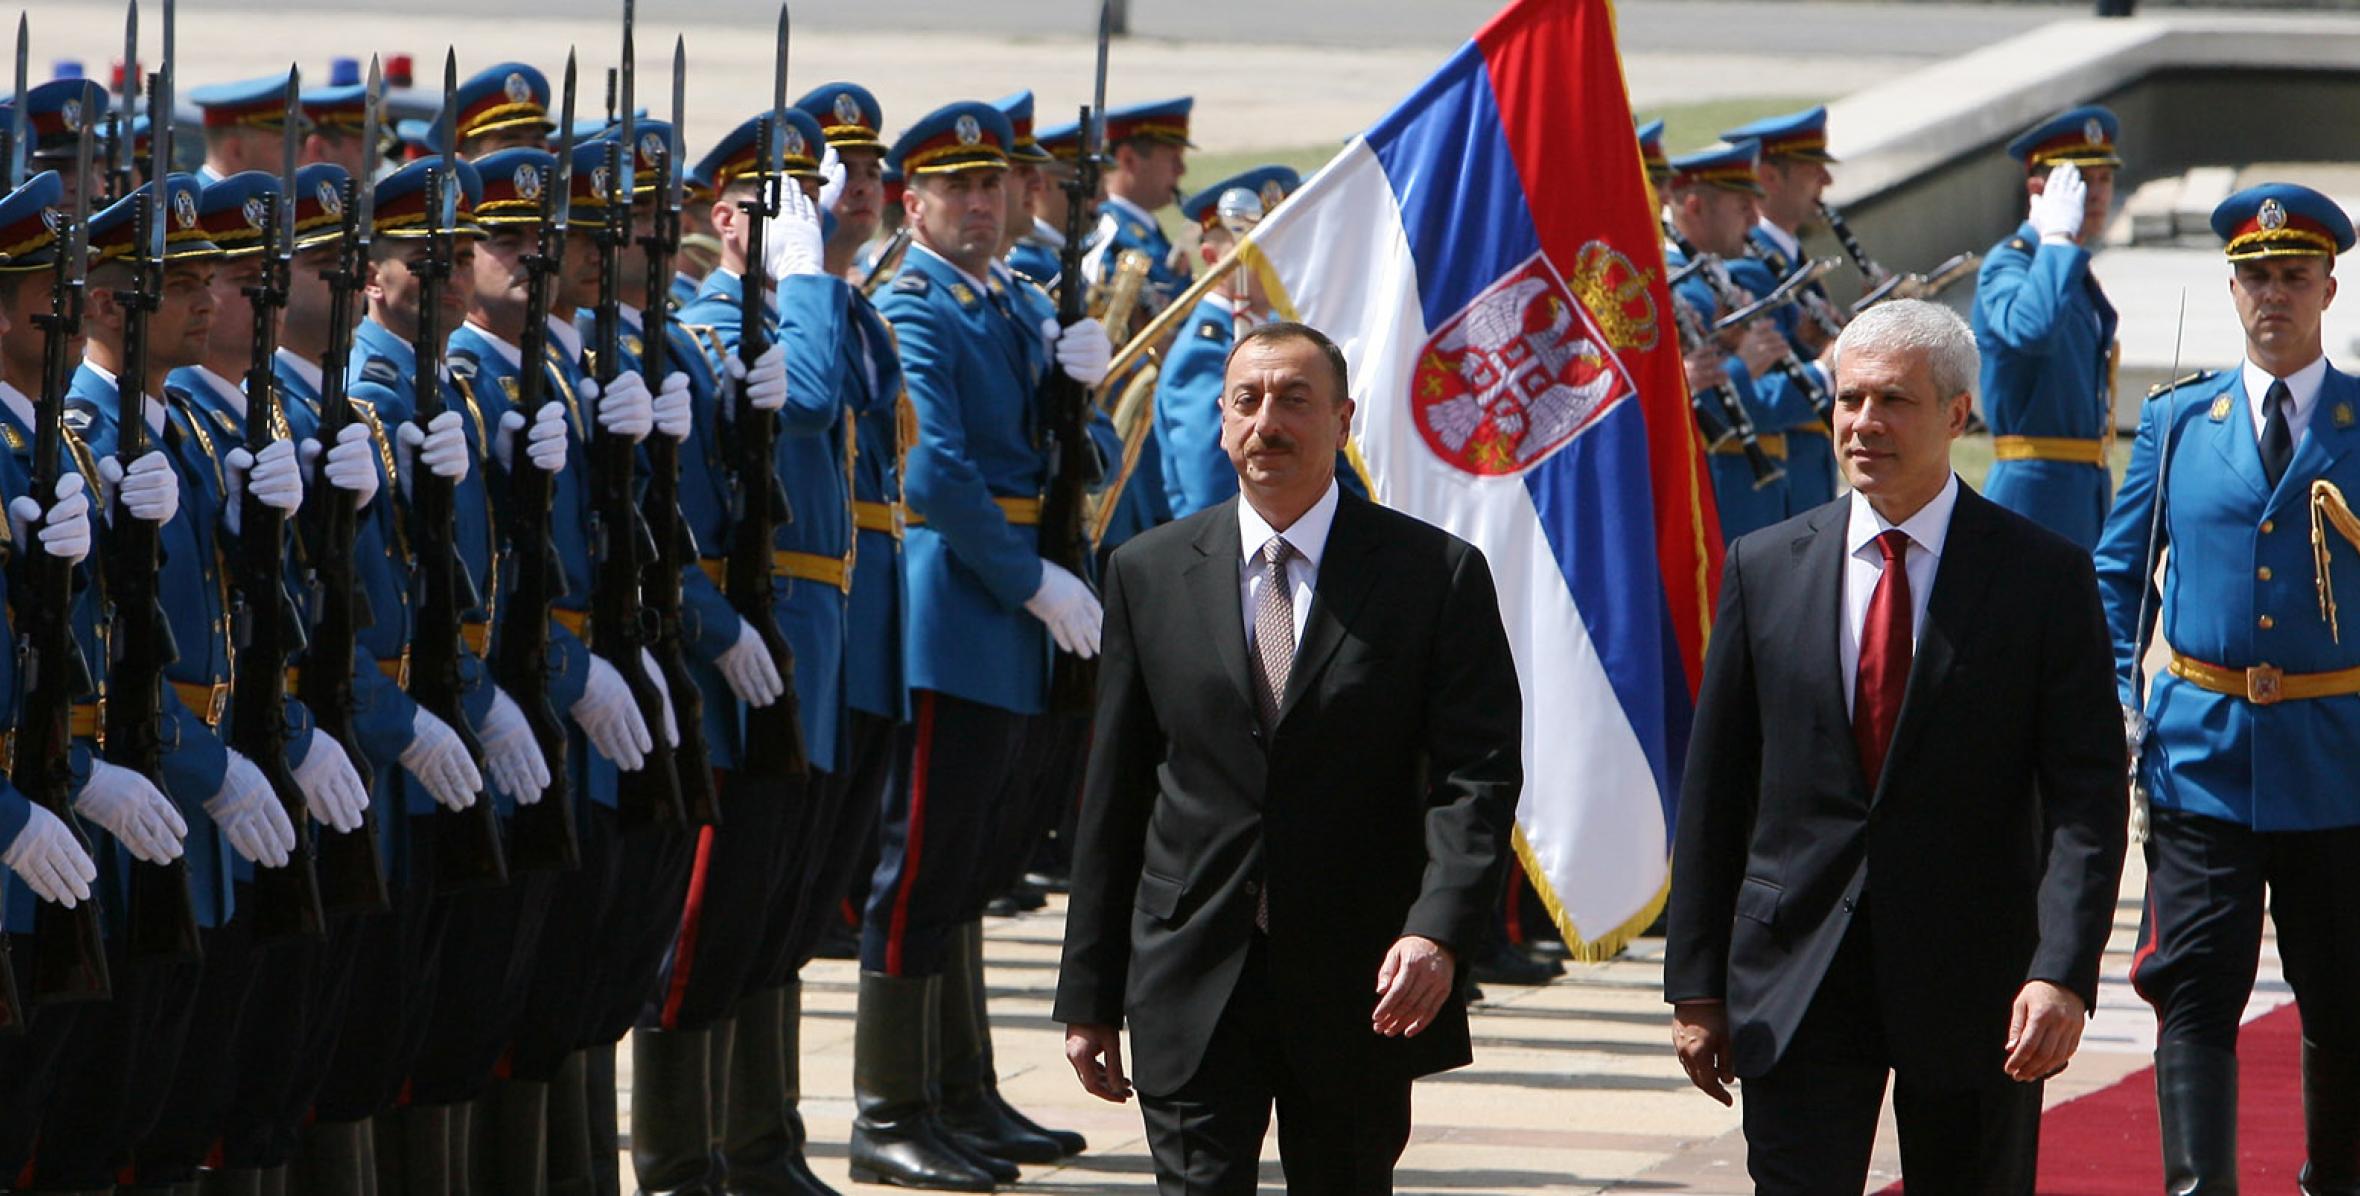 Official welcoming ceremony of Ilham Aliyev in Serbia was held